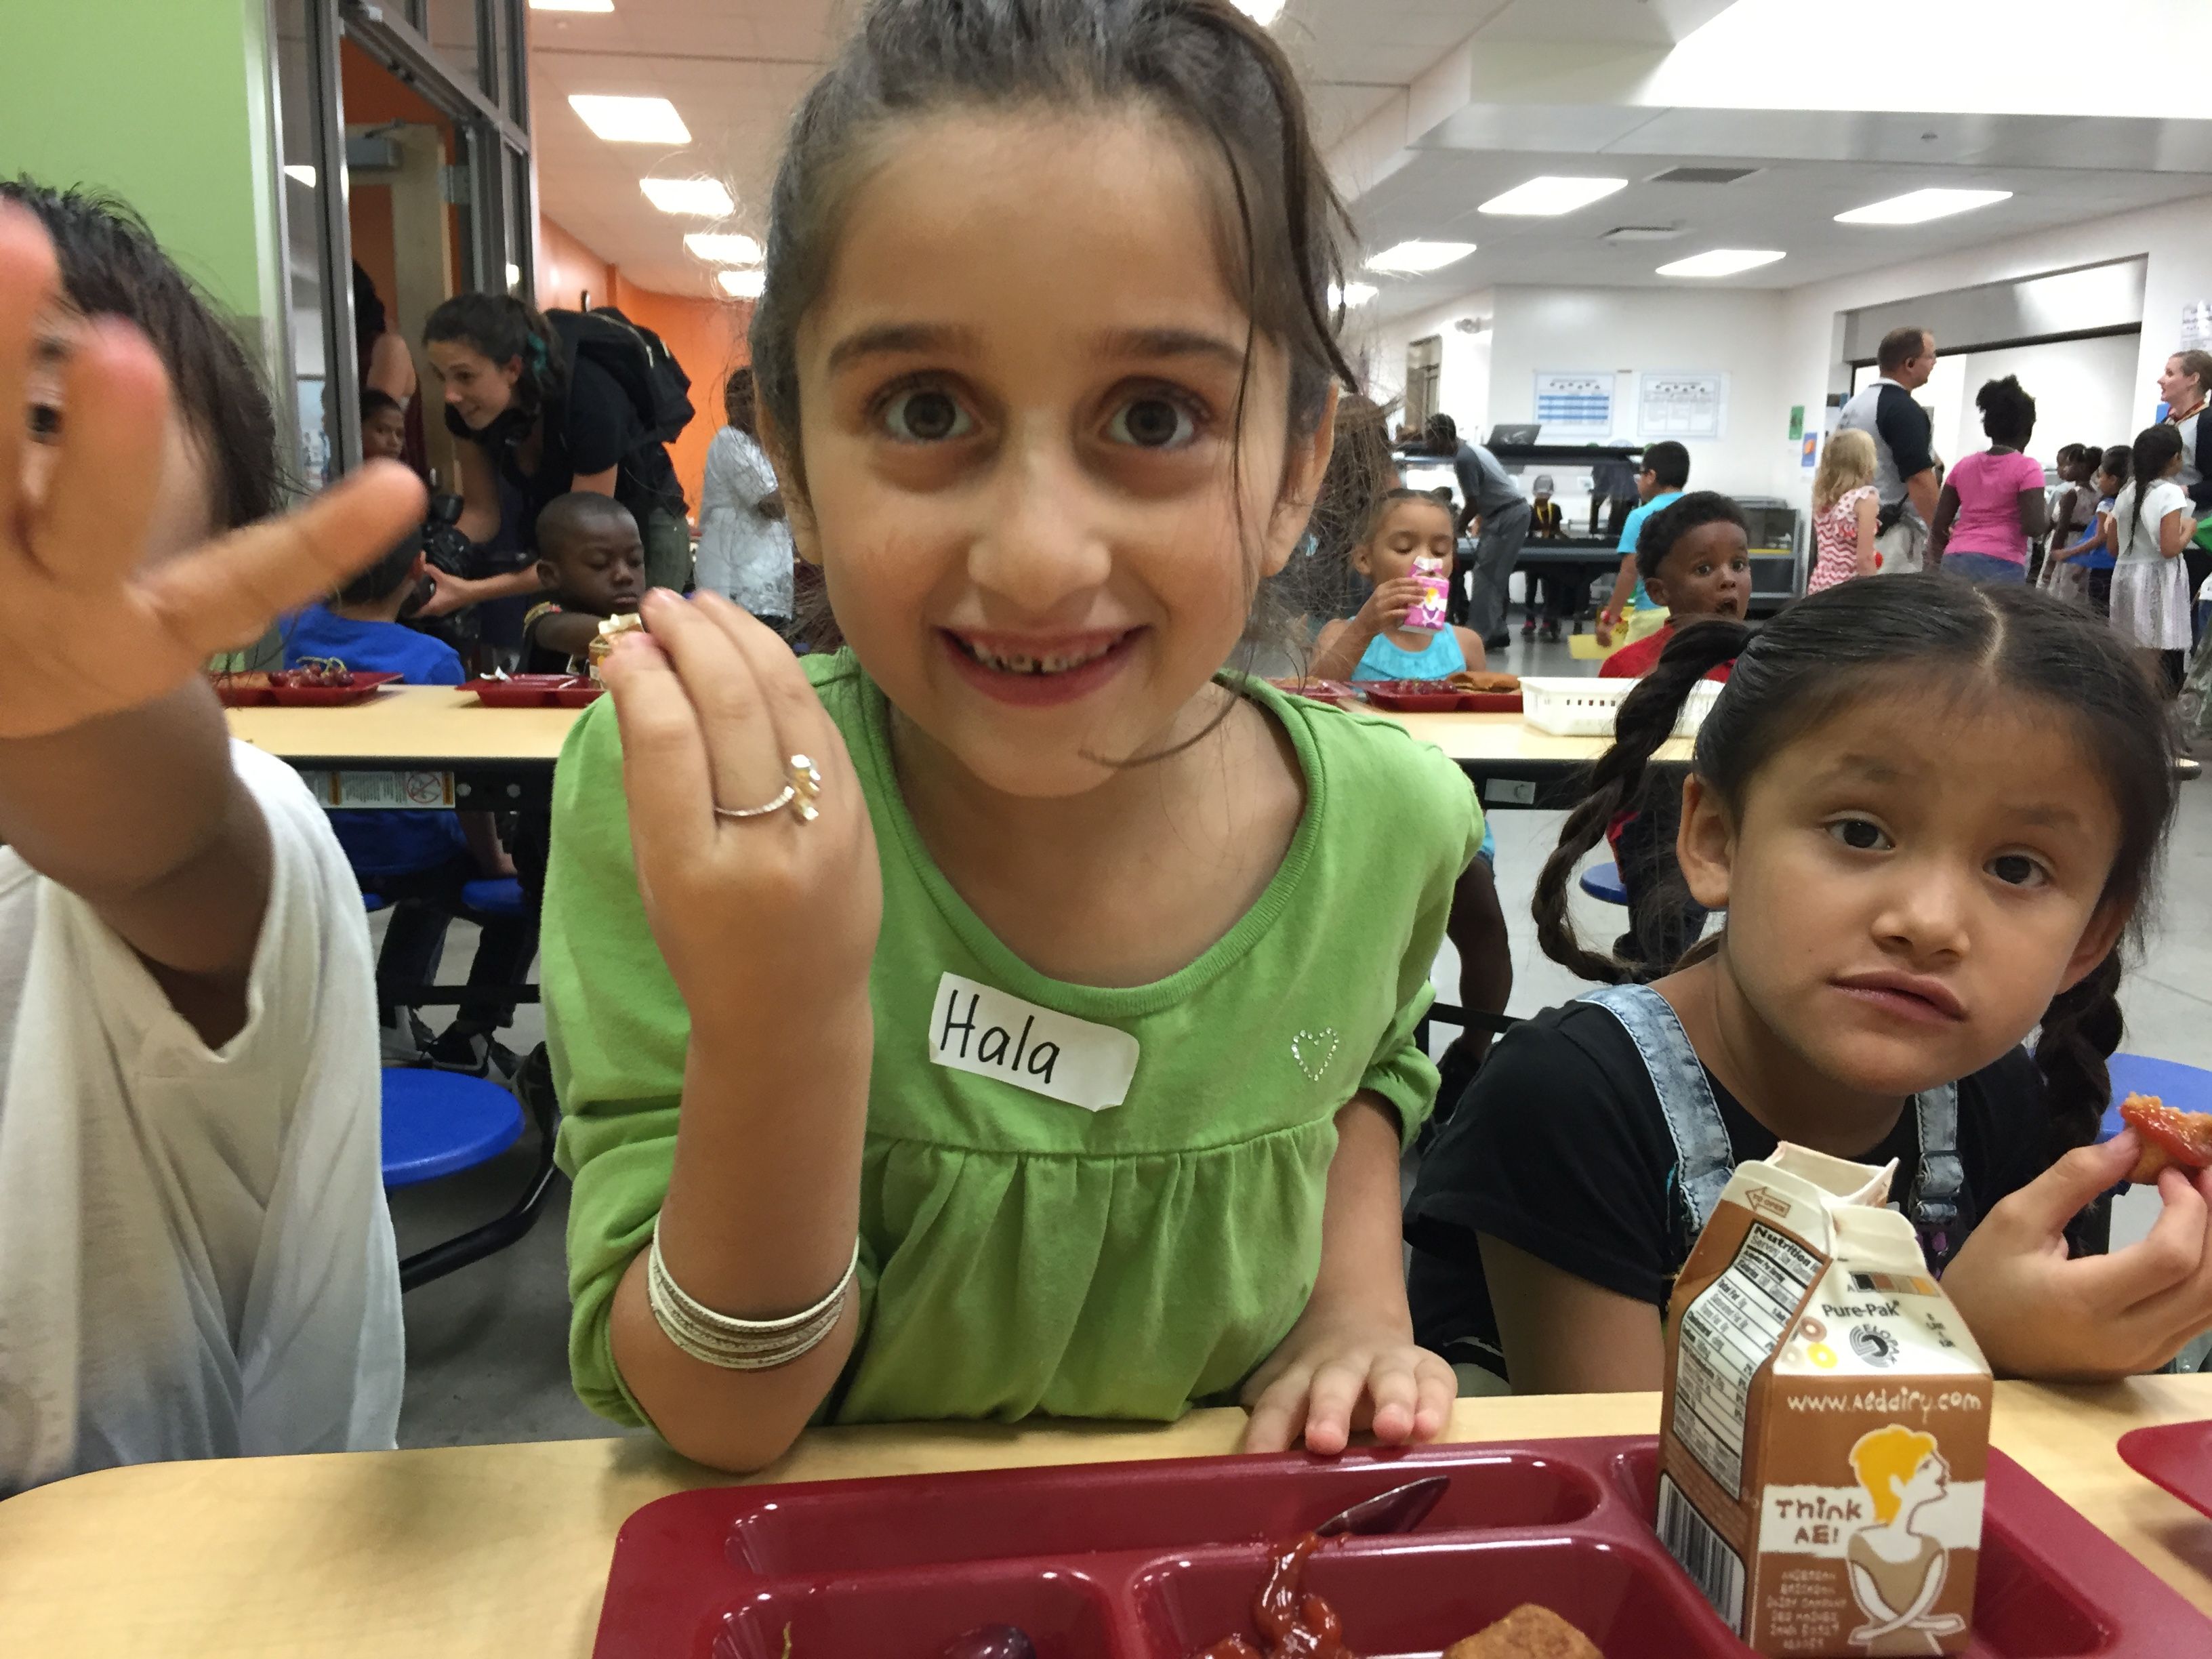 All summer long, the kids talk about starting school. "I'm so excited to learn," Hala says on her first day.